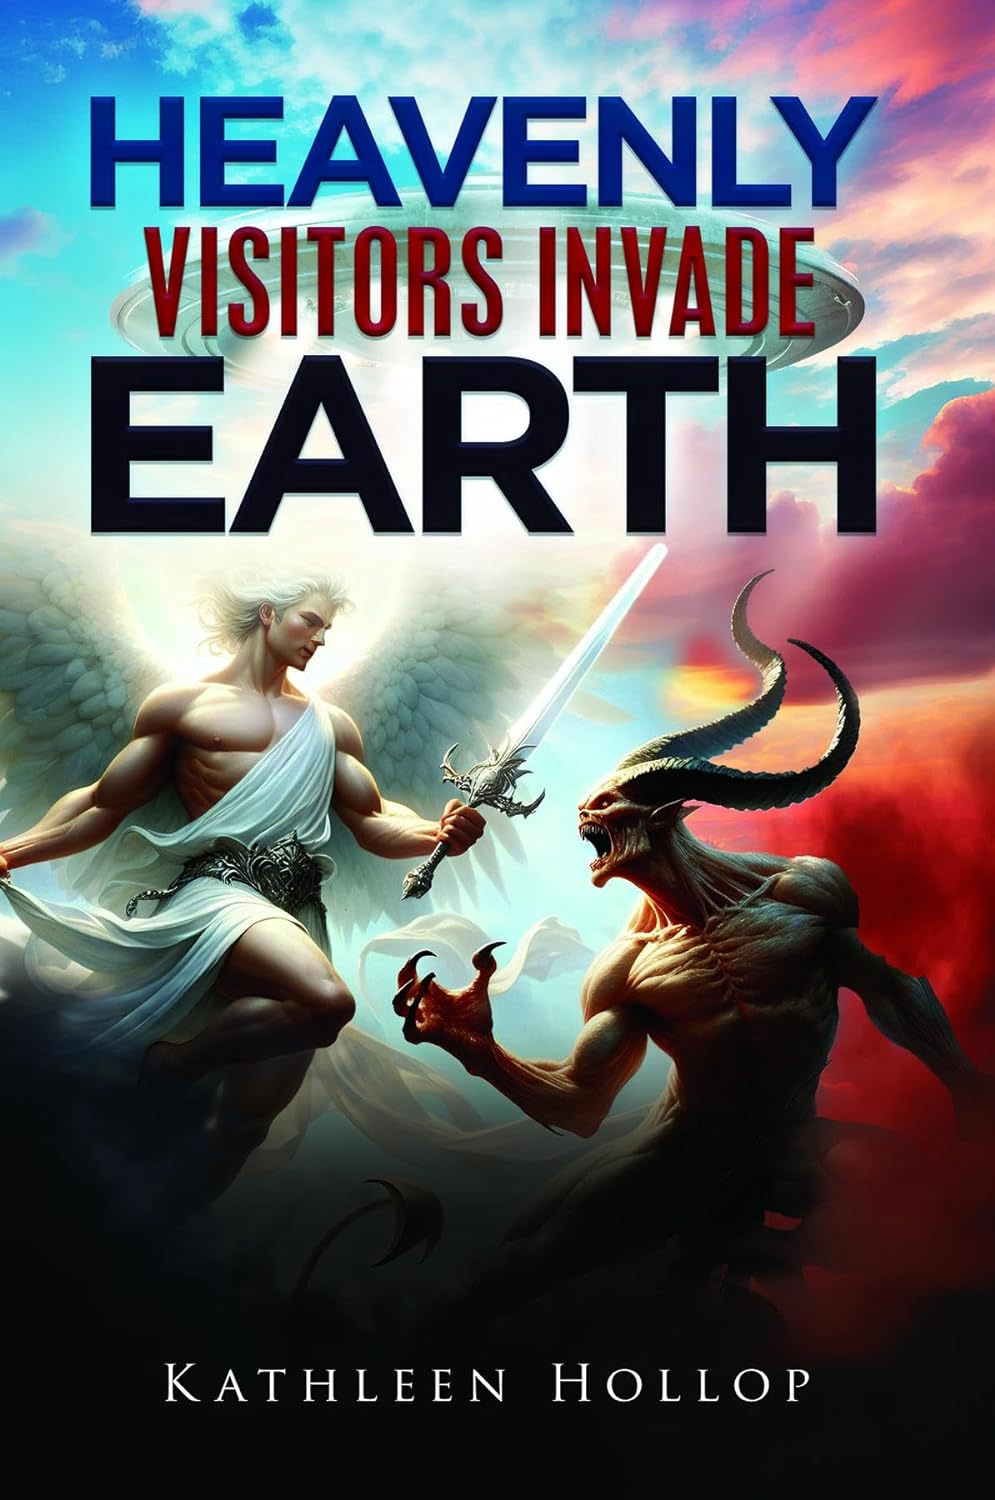 Ink Start Media Unveils Kathleen Hollop’s Riveting New Release: "Heavenly Visitors Invade Earth"